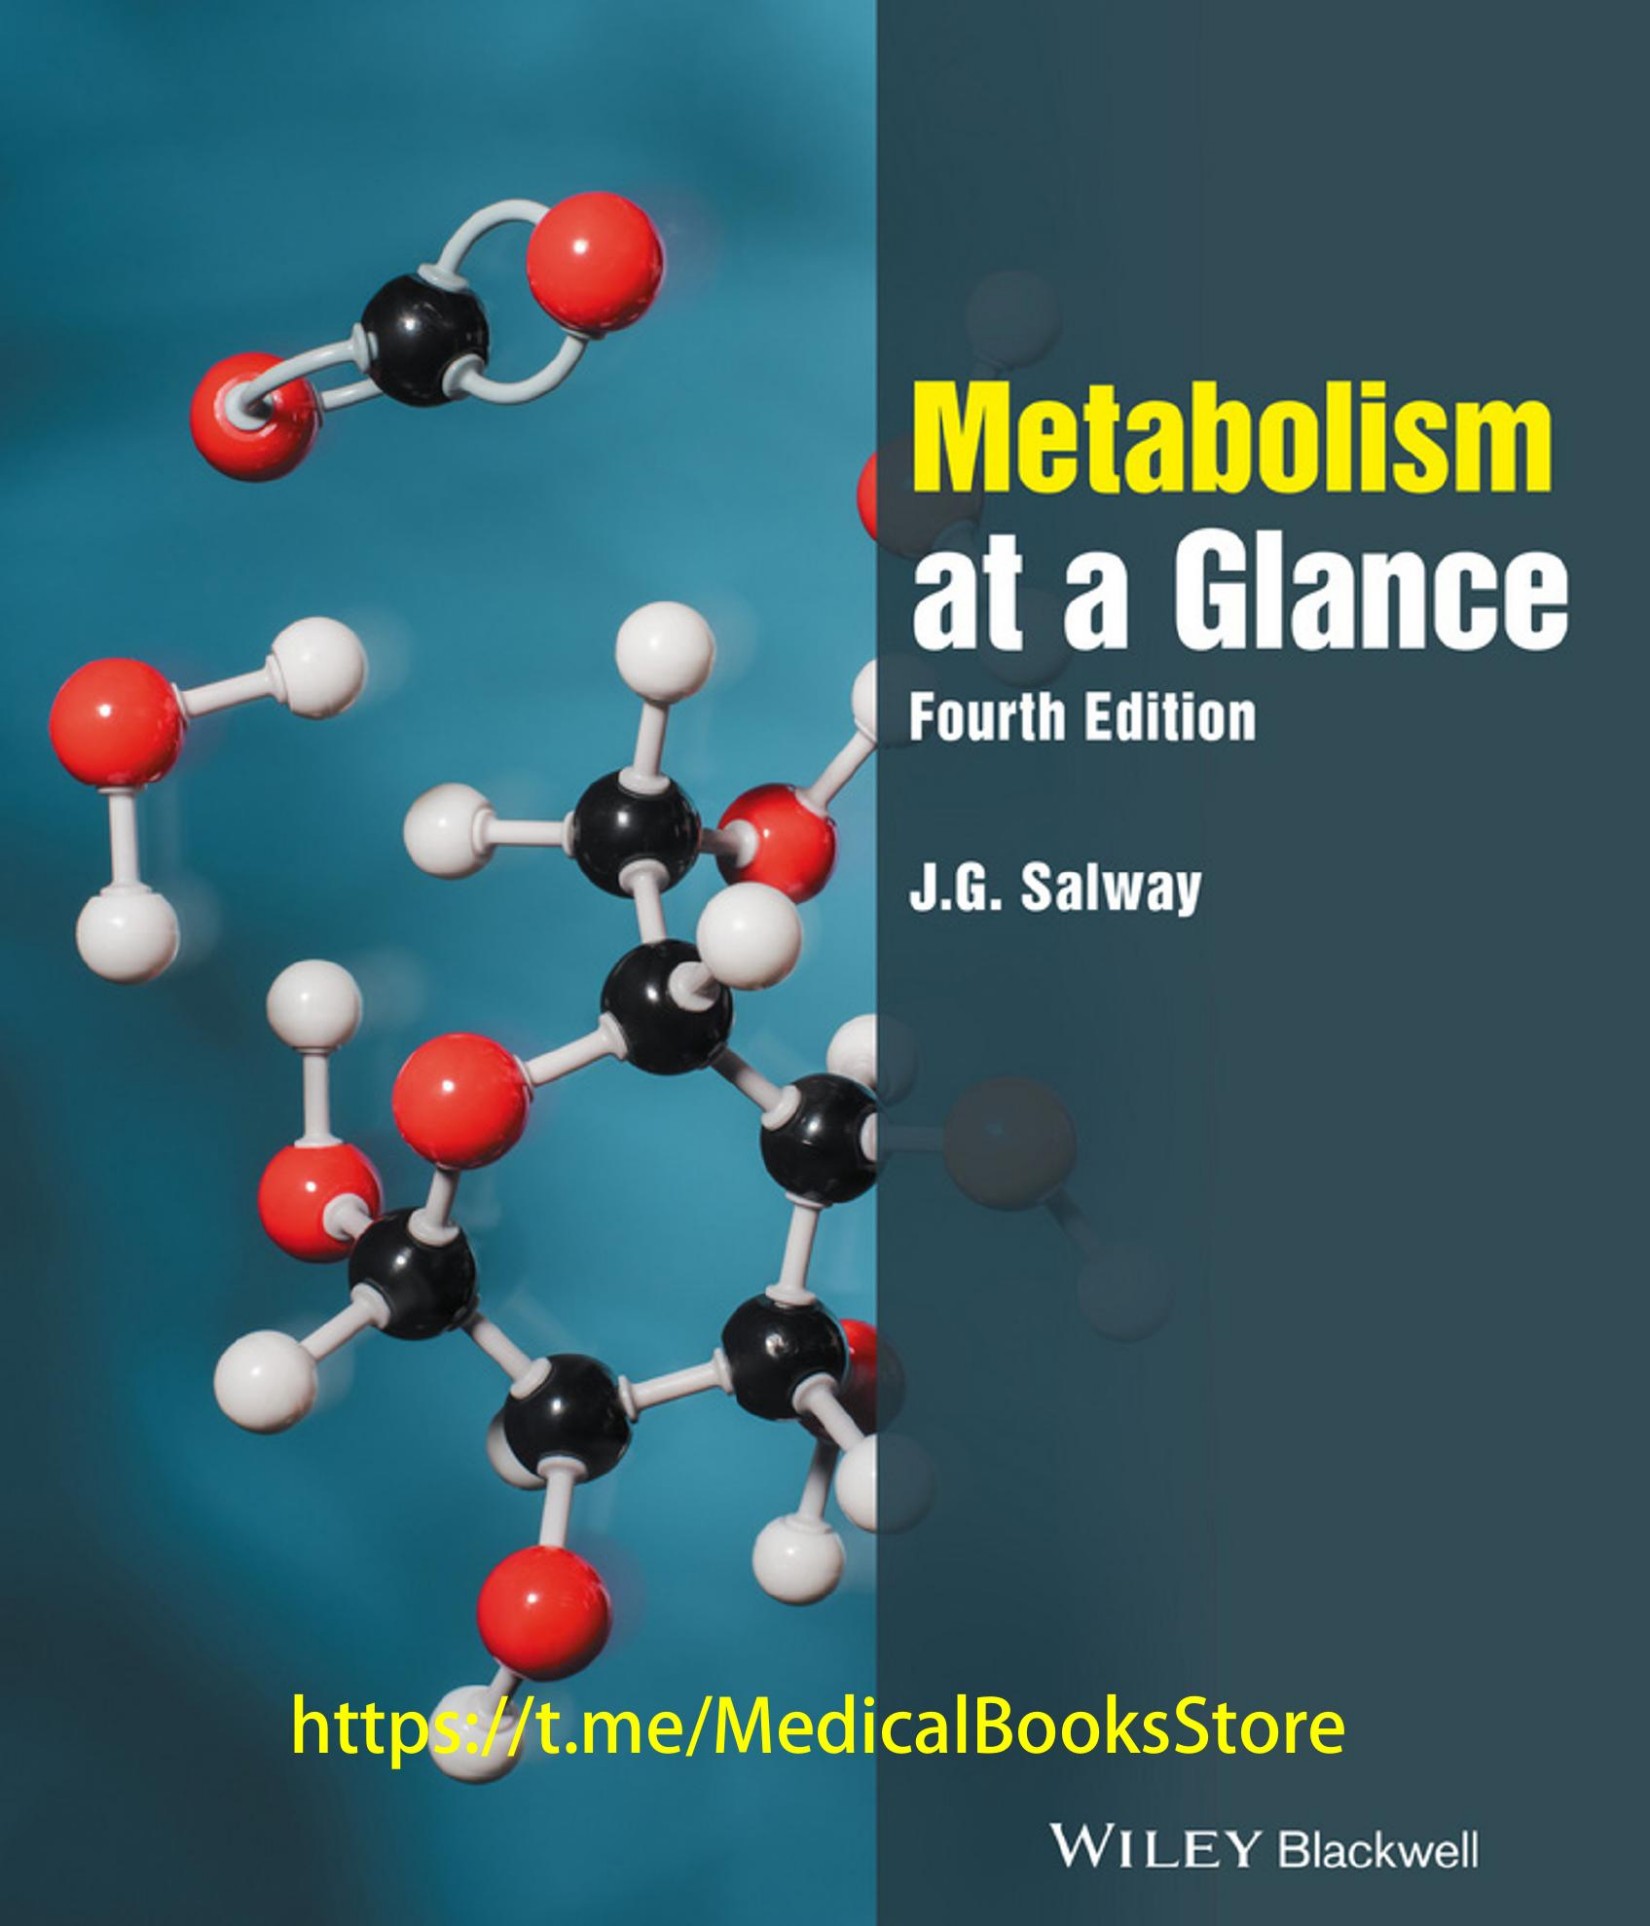 Metabolism at a Glance